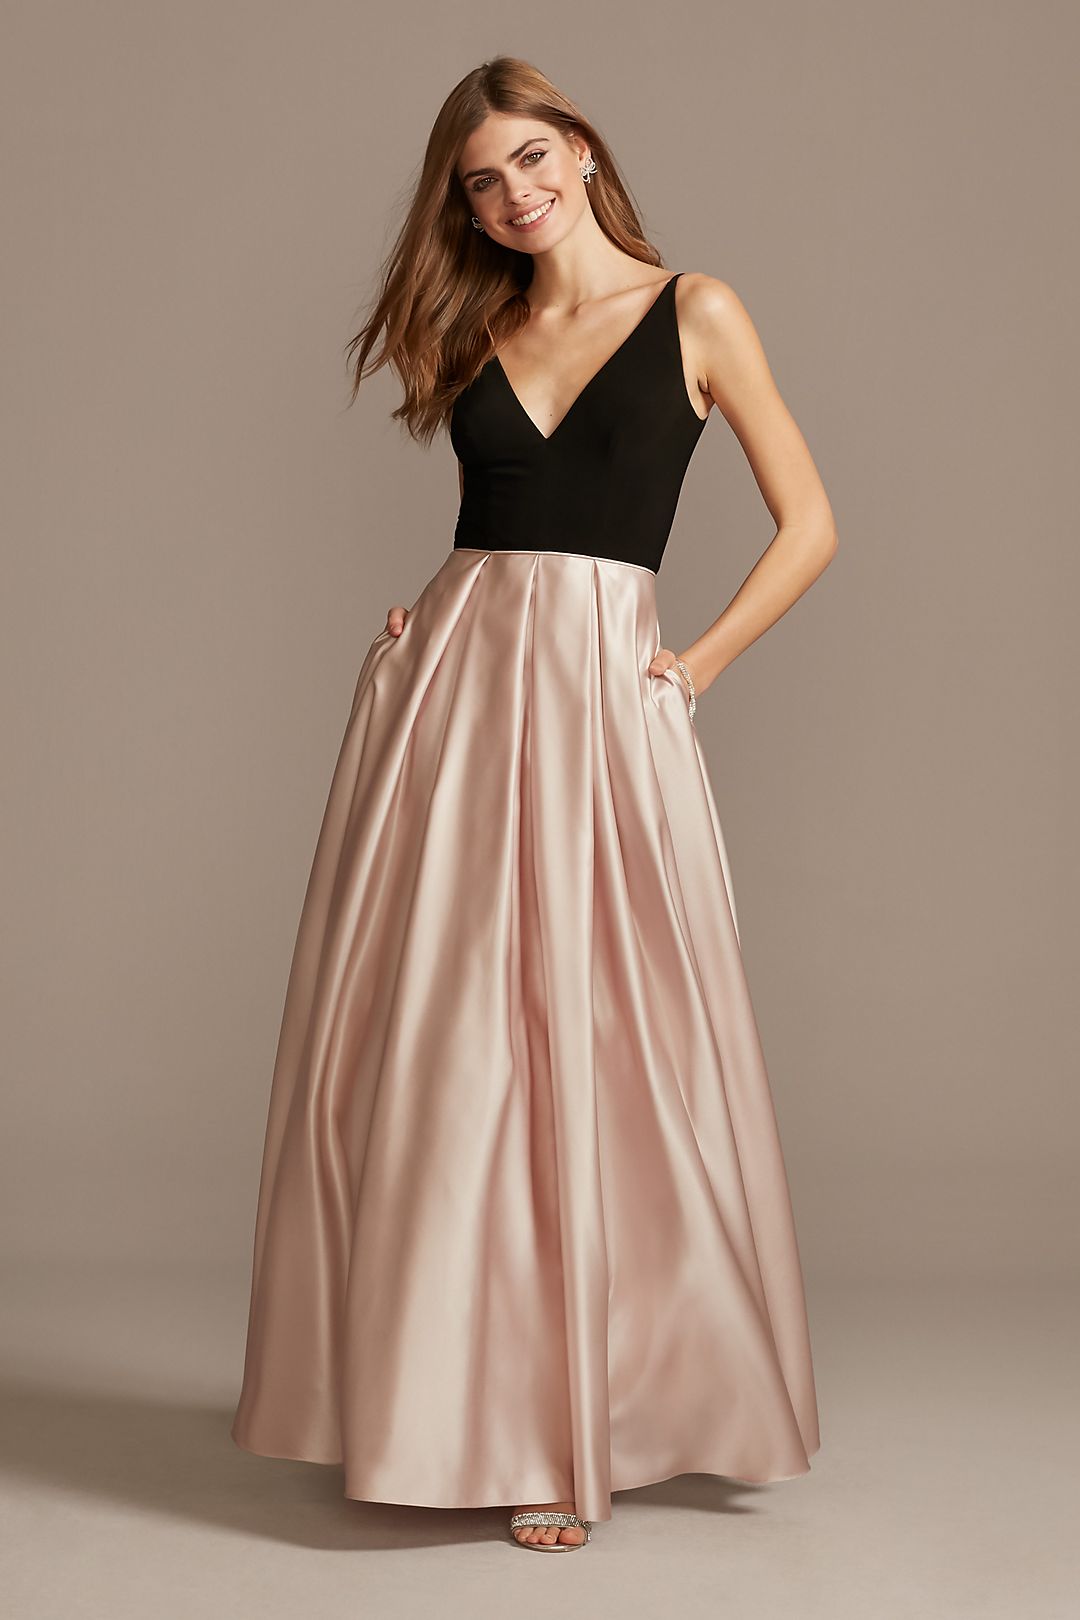 Satin Skirt Plunging-V Ball Gown with Pockets Image 4